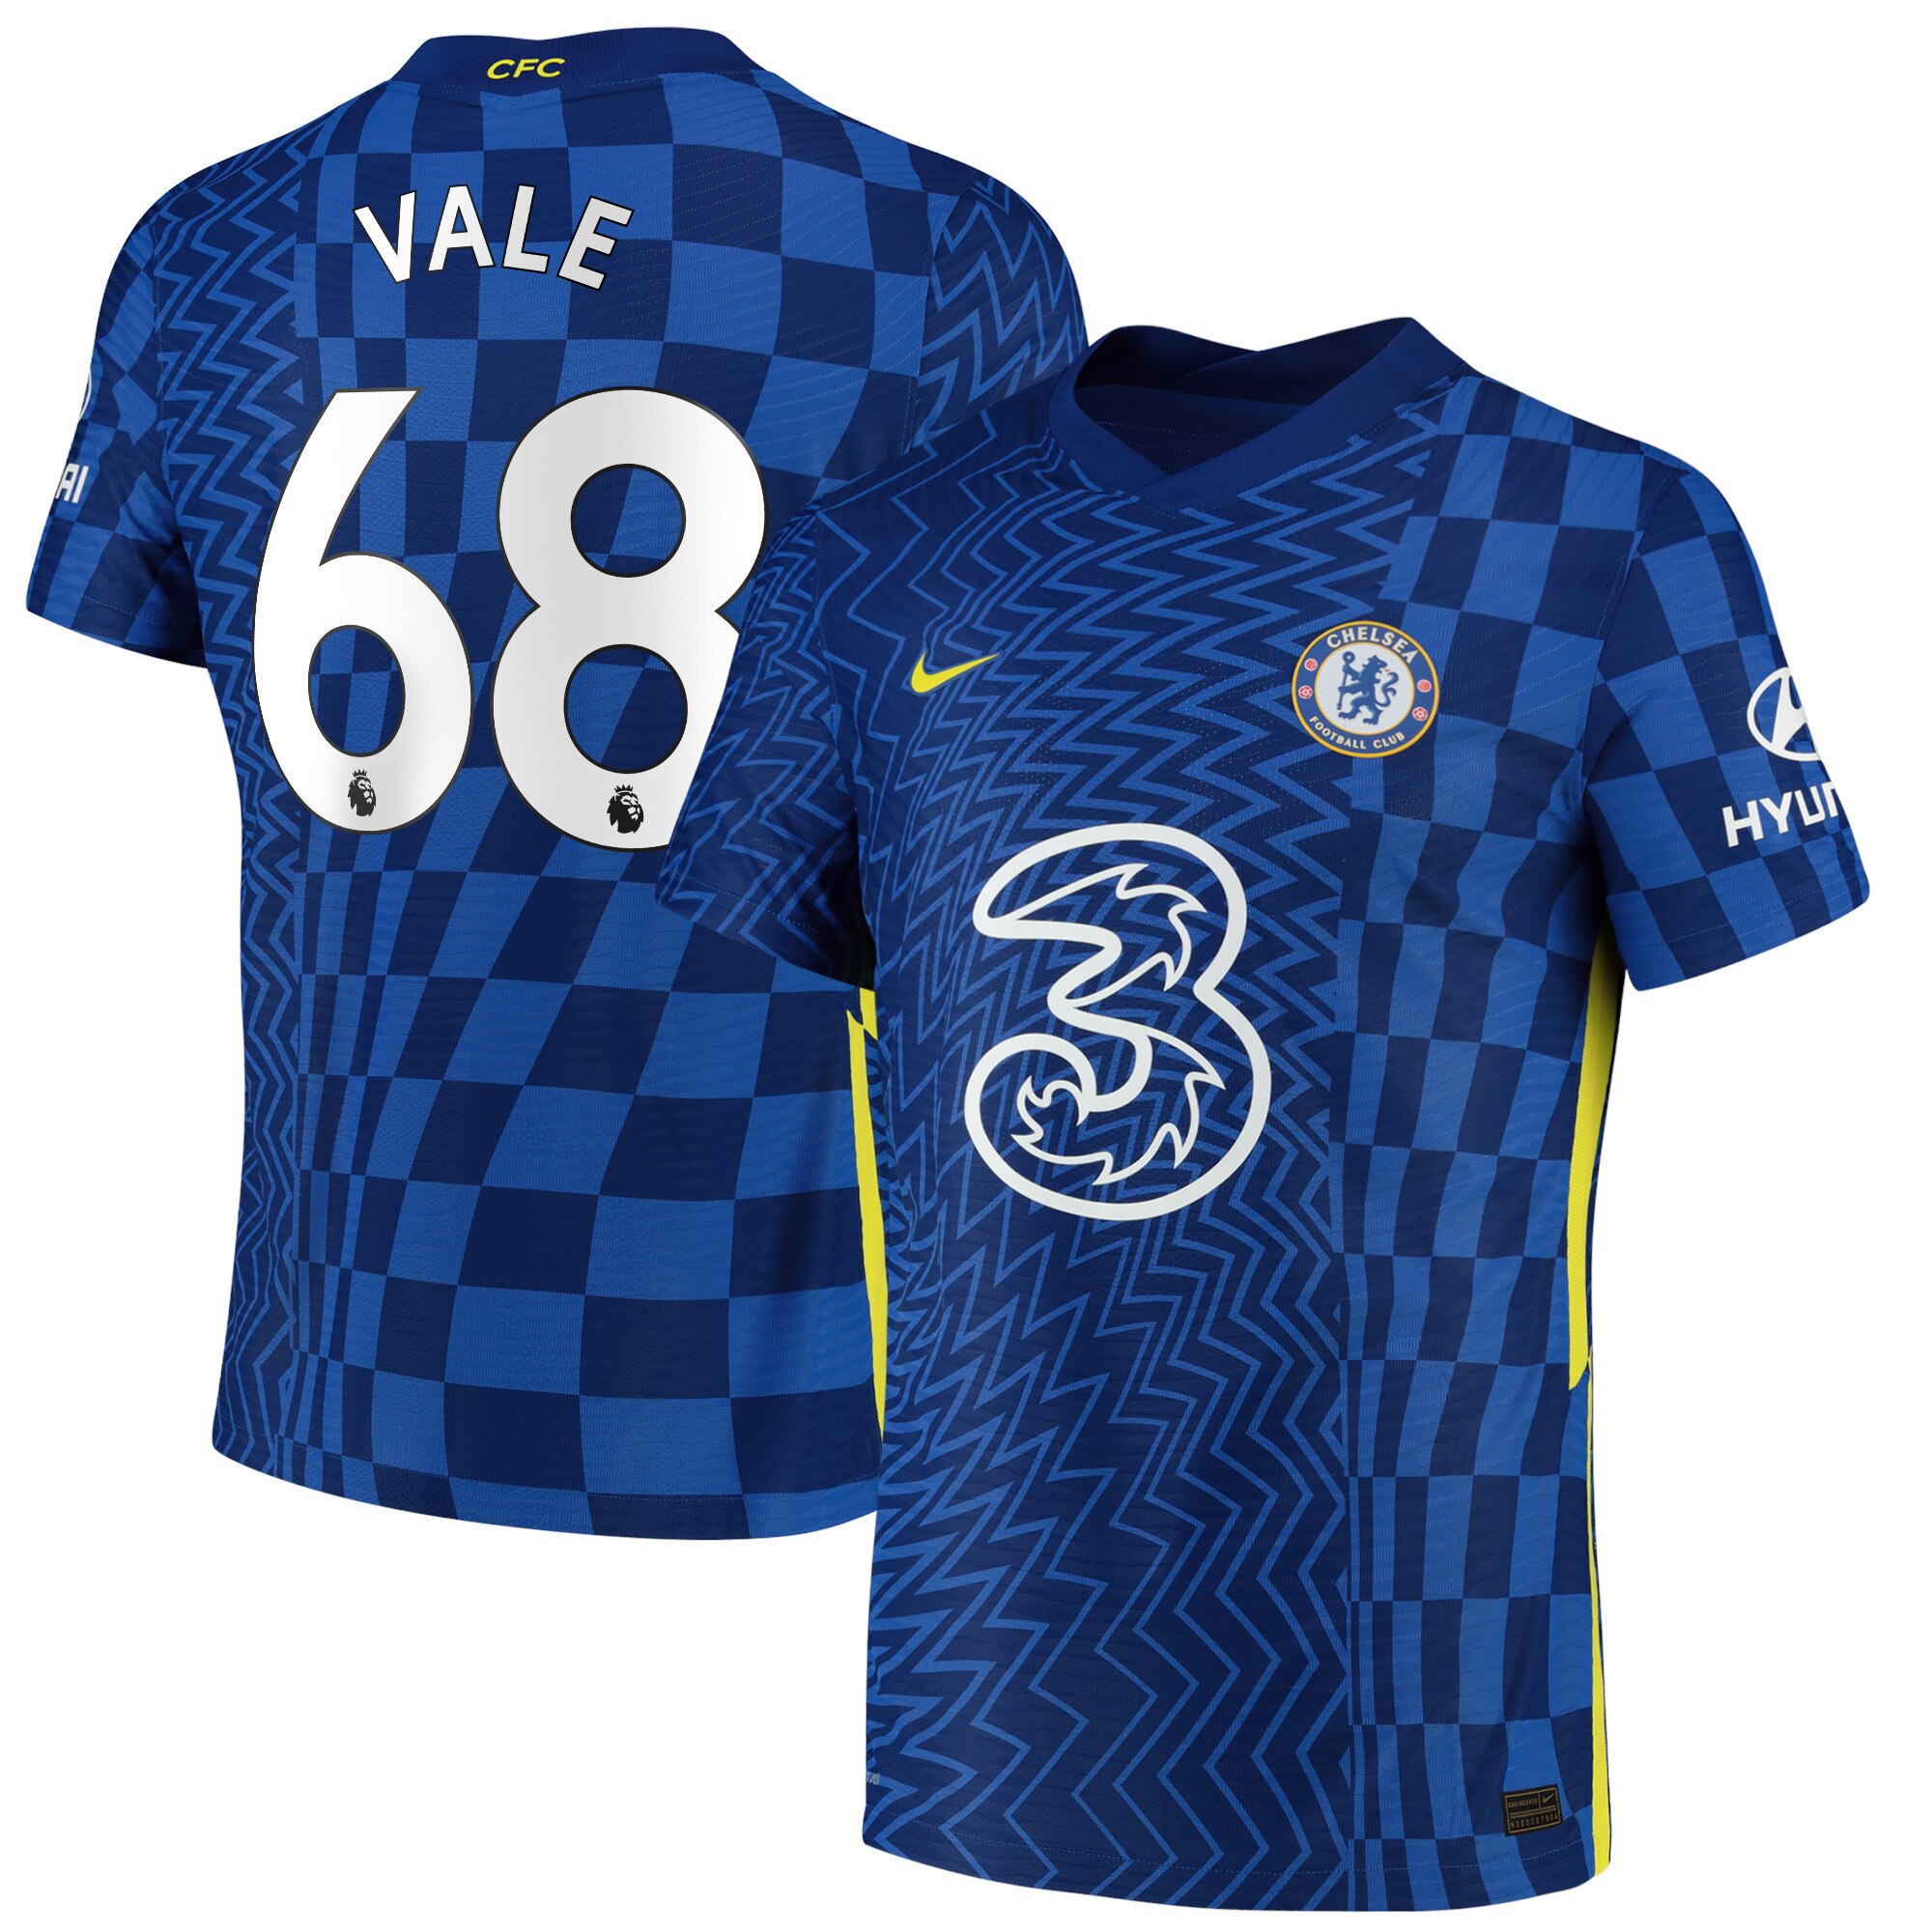 Chelsea Home Vapor Match Shirt 2021-22 with Vale 68 printing